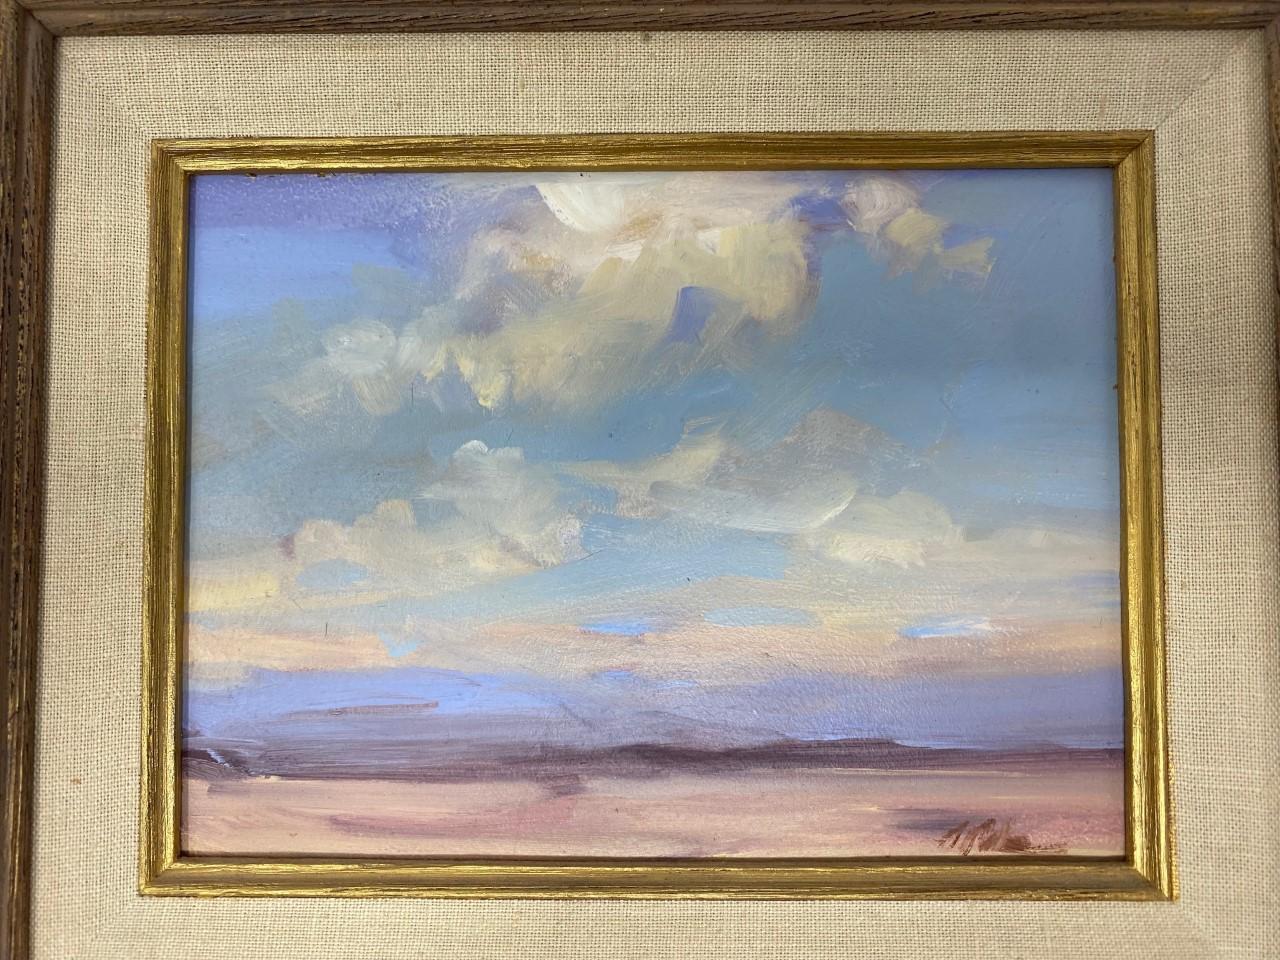 Very unique and beautiful oil on canvas rendition by celebrated american painter George Pate.  This original piece is part of the New Mexico series by George Pate.  The piece is 6”x8” framed in a 11”x13”.  The painting exhibits a beautiful desert